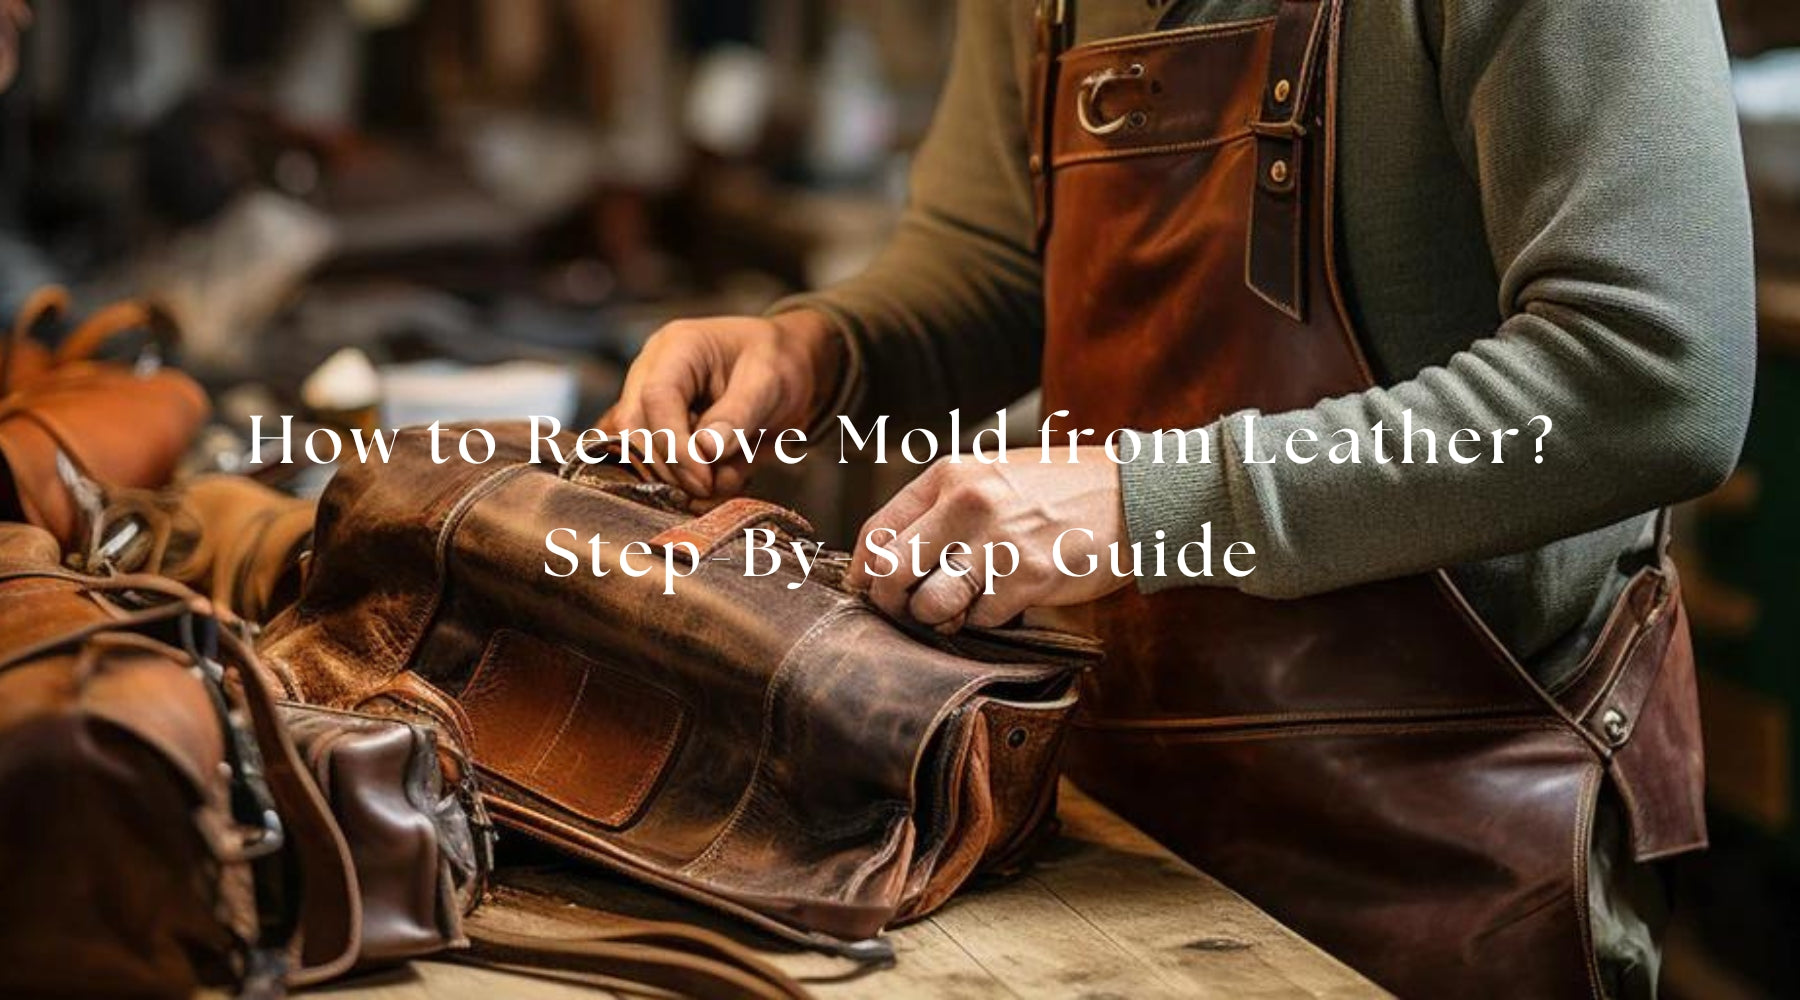 How to Remove Mold from Leather: Step-By-Step Guide